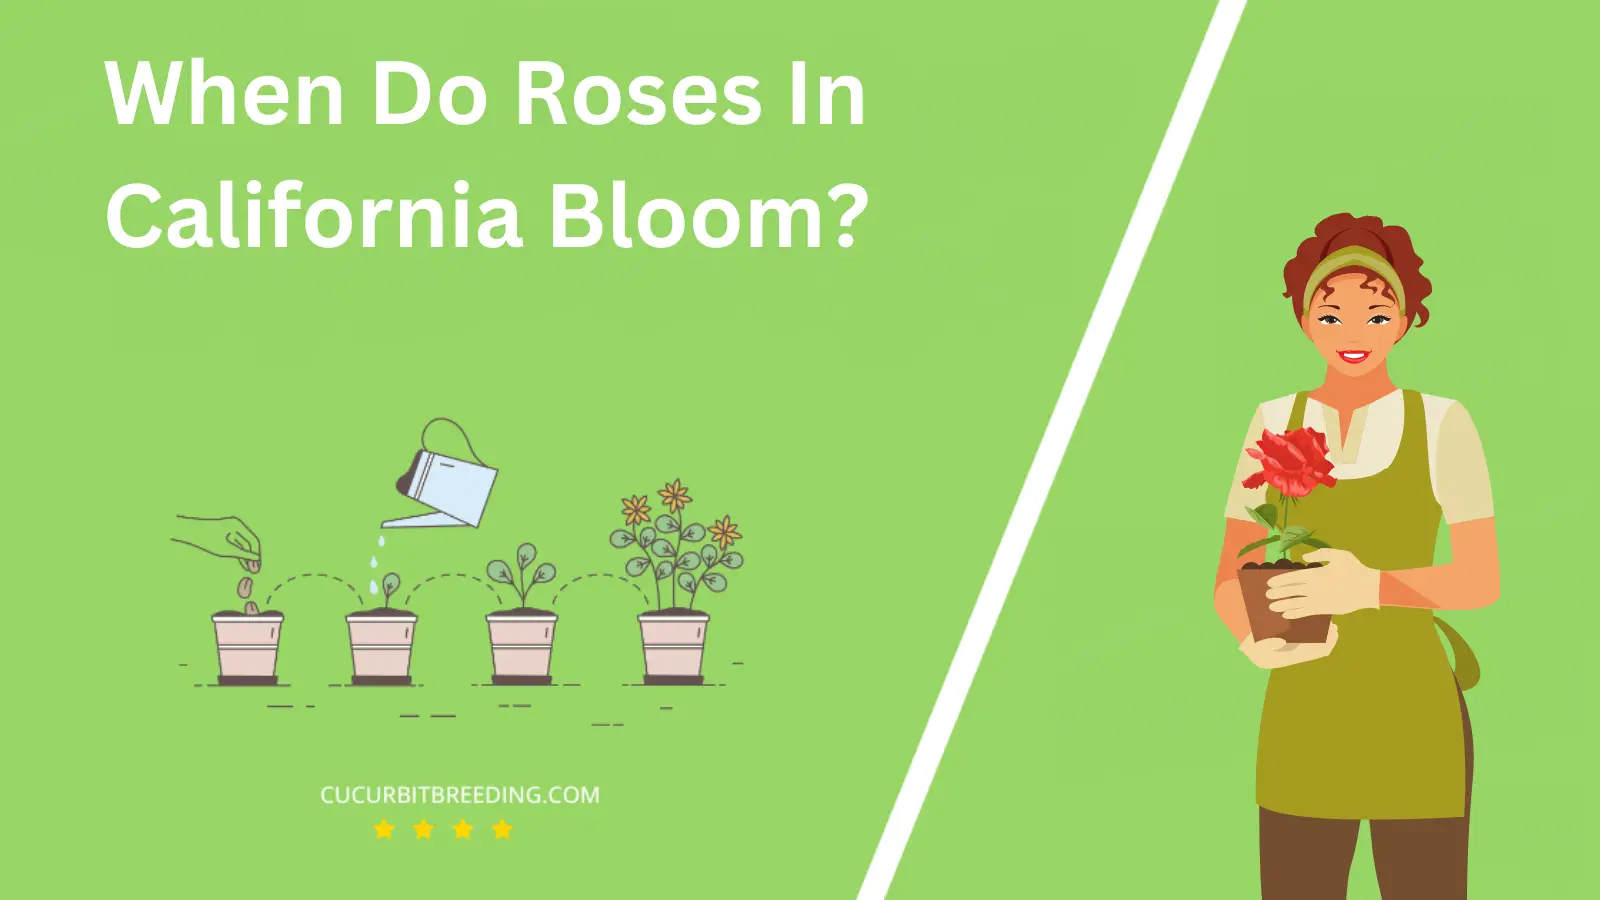 When Do Roses In California Bloom?